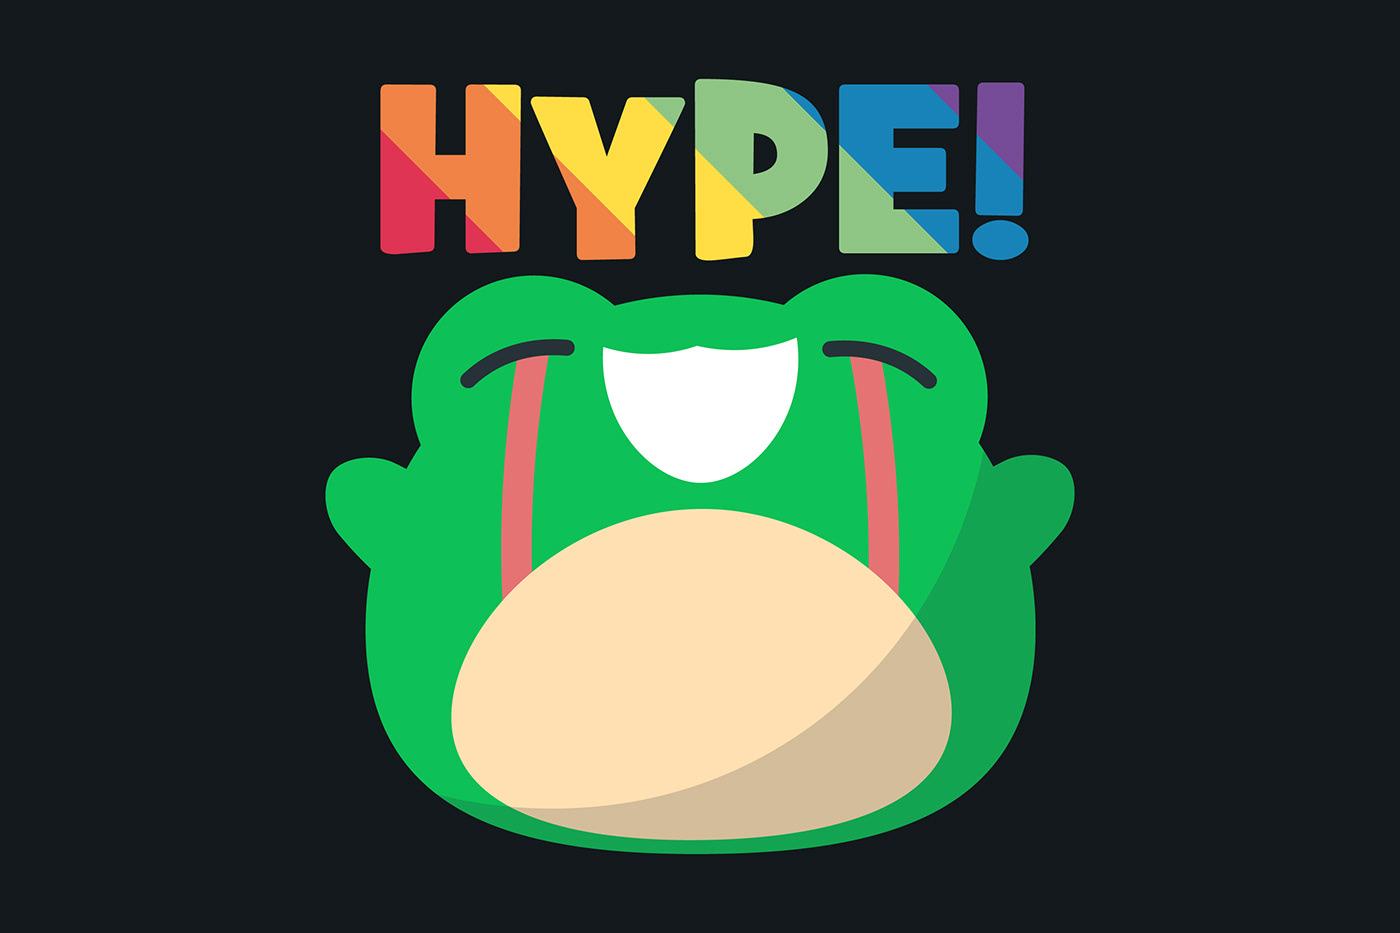 HYPE Emote for Twitch